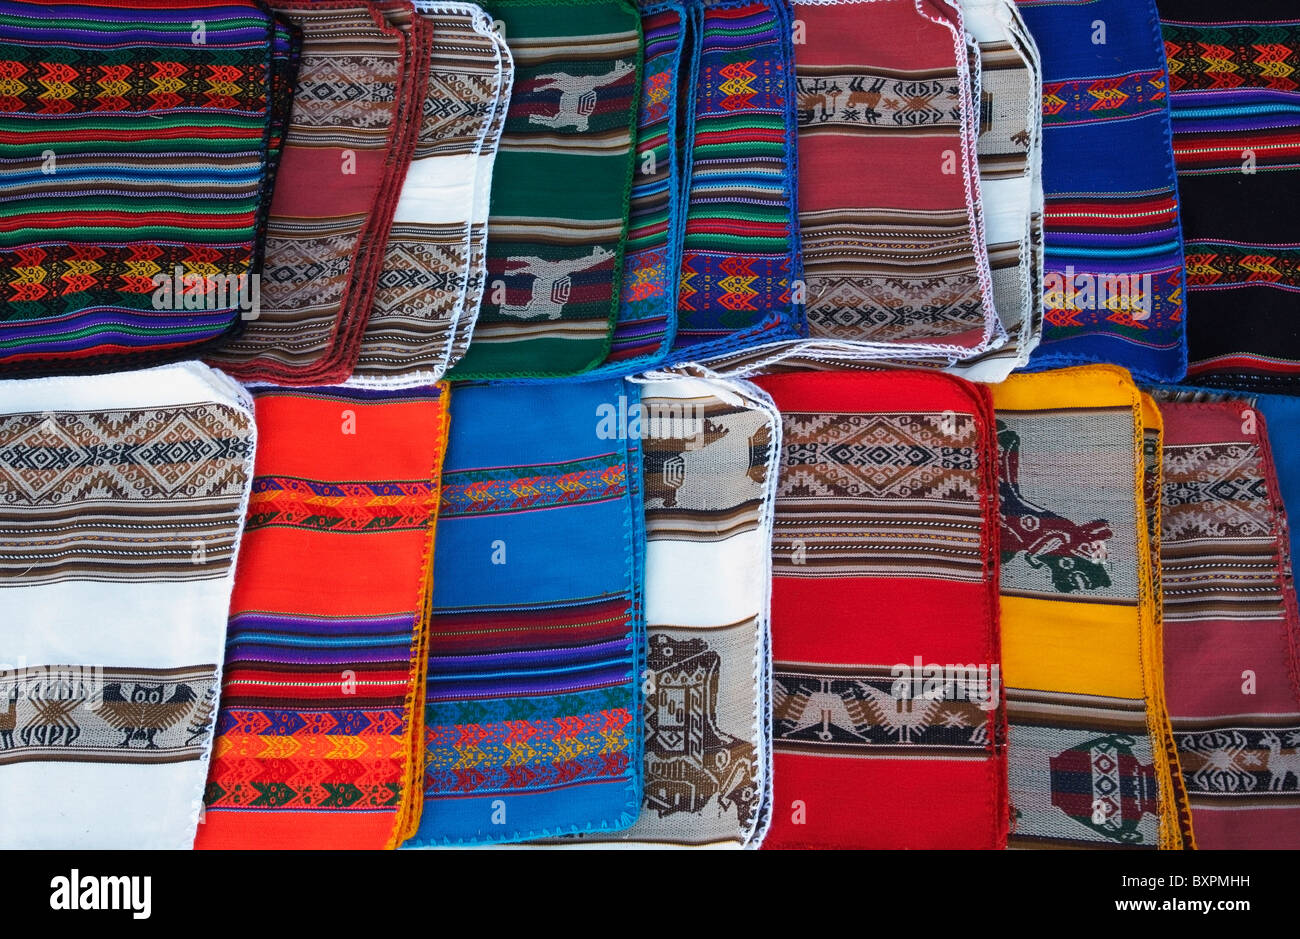 Traditional Table Mats Sold By Amaryan People Stock Photo